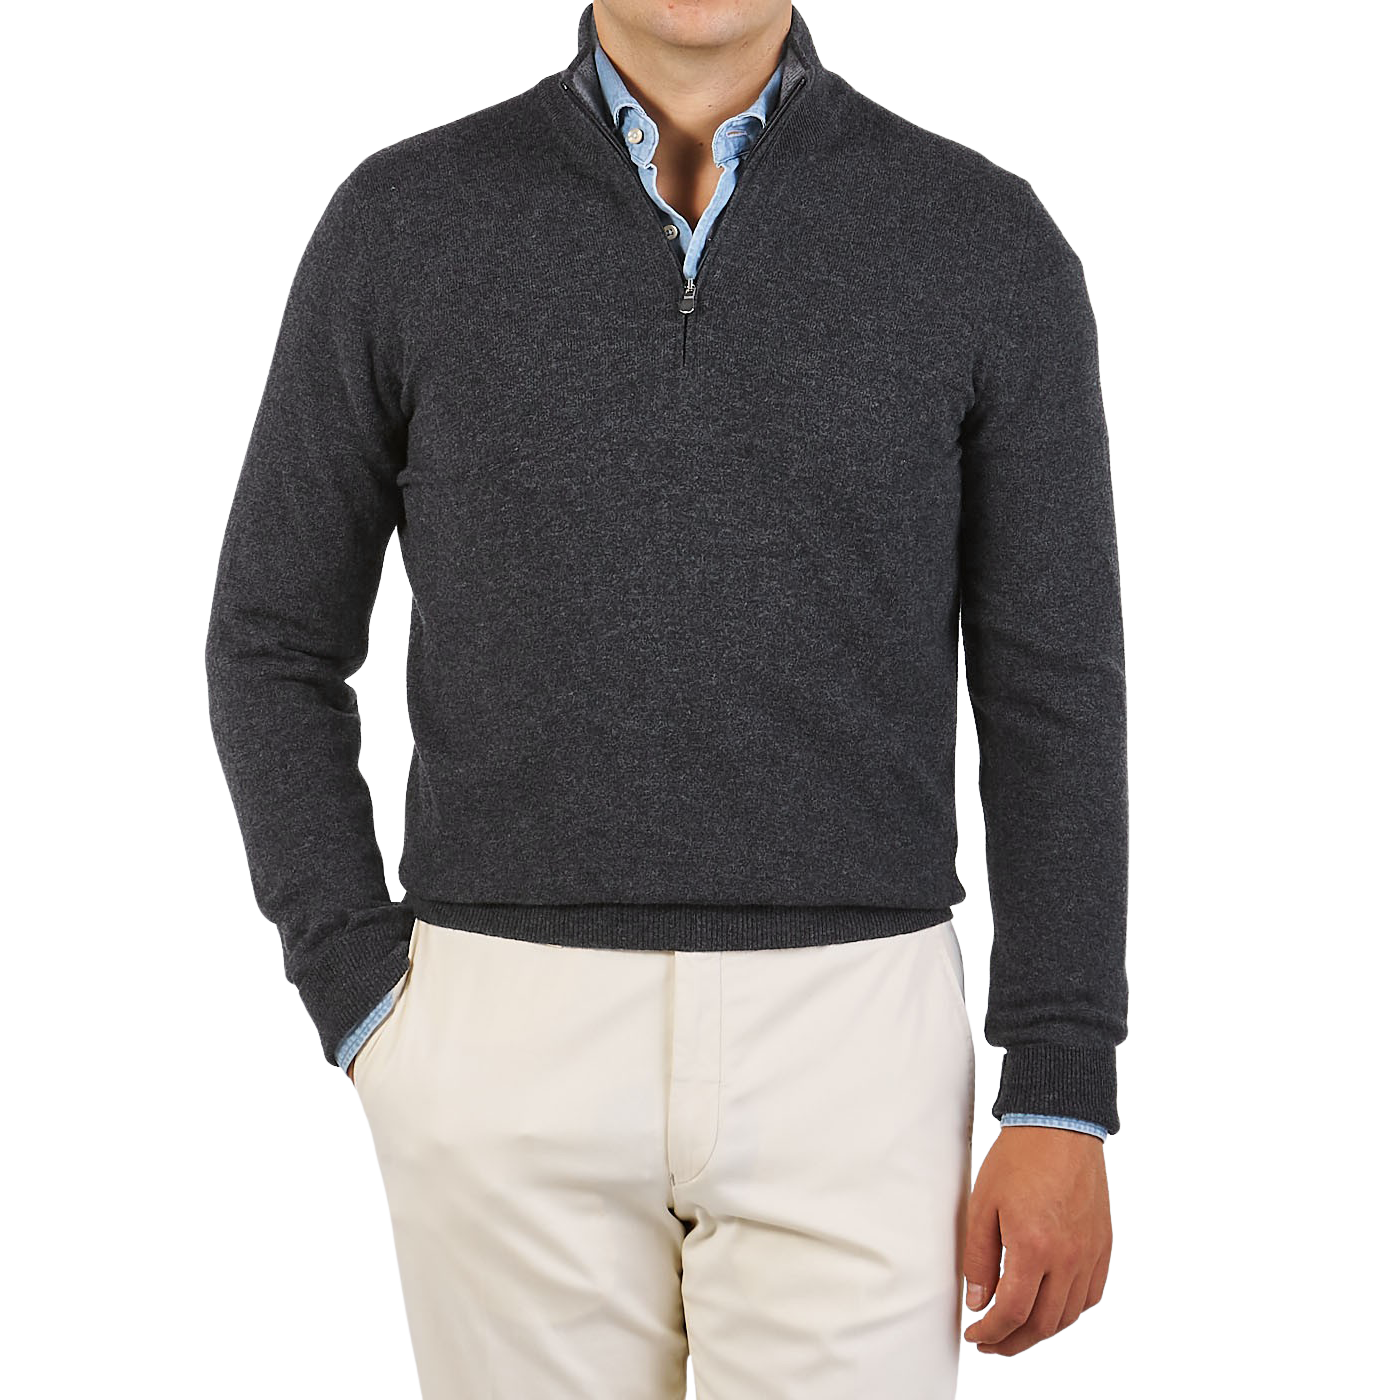 Gran Sasso Charcoal Grey Wool Cashmere 1:4 Zip Sweater Front